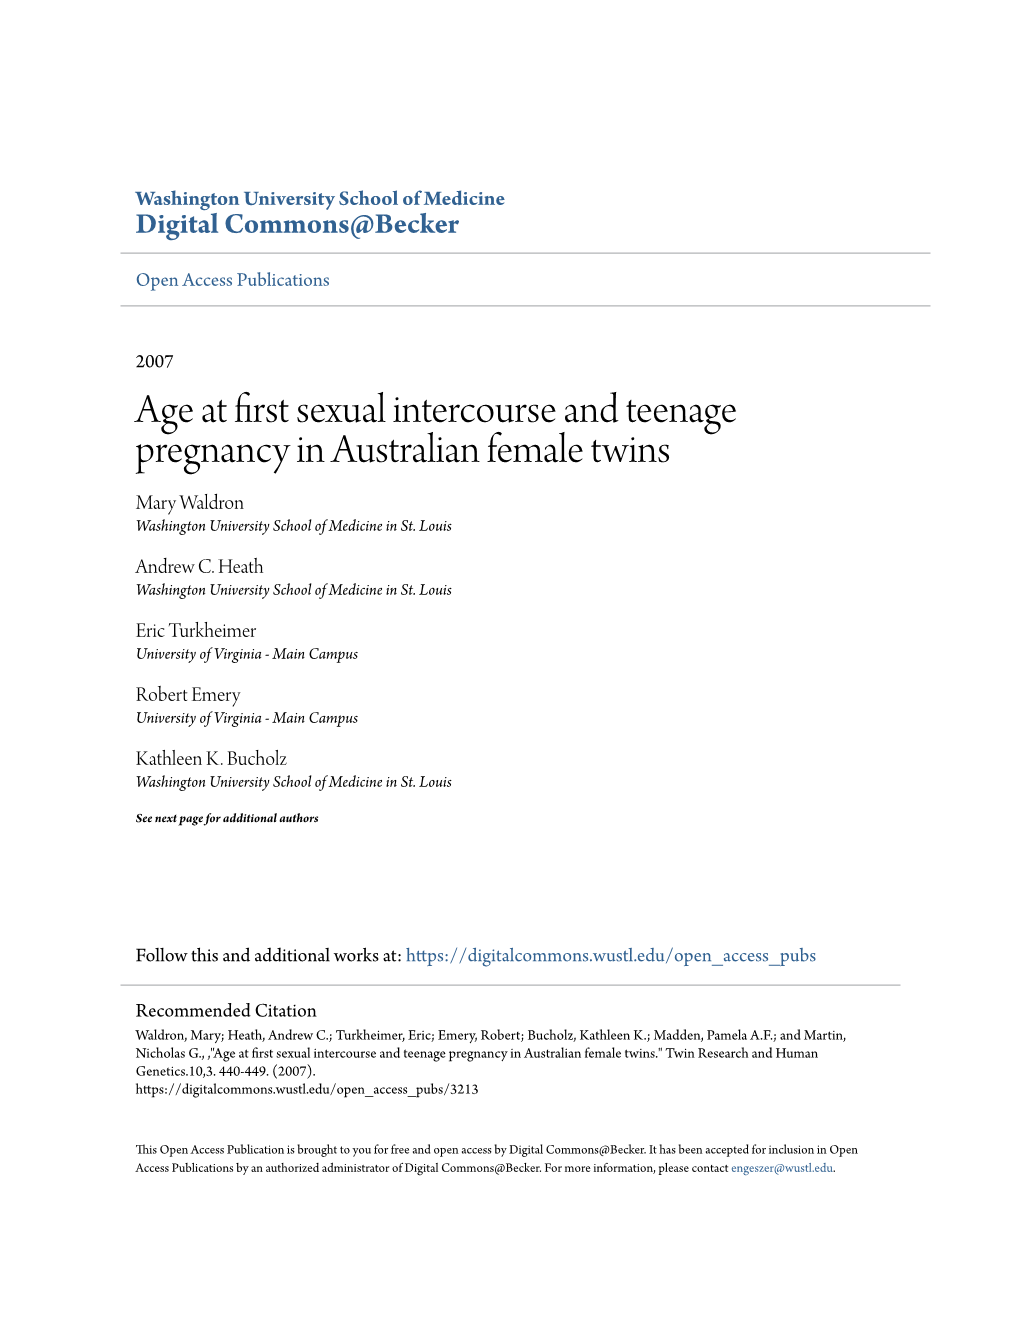 Age at First Sexual Intercourse and Teenage Pregnancy in Australian Female Twins Mary Waldron Washington University School of Medicine in St